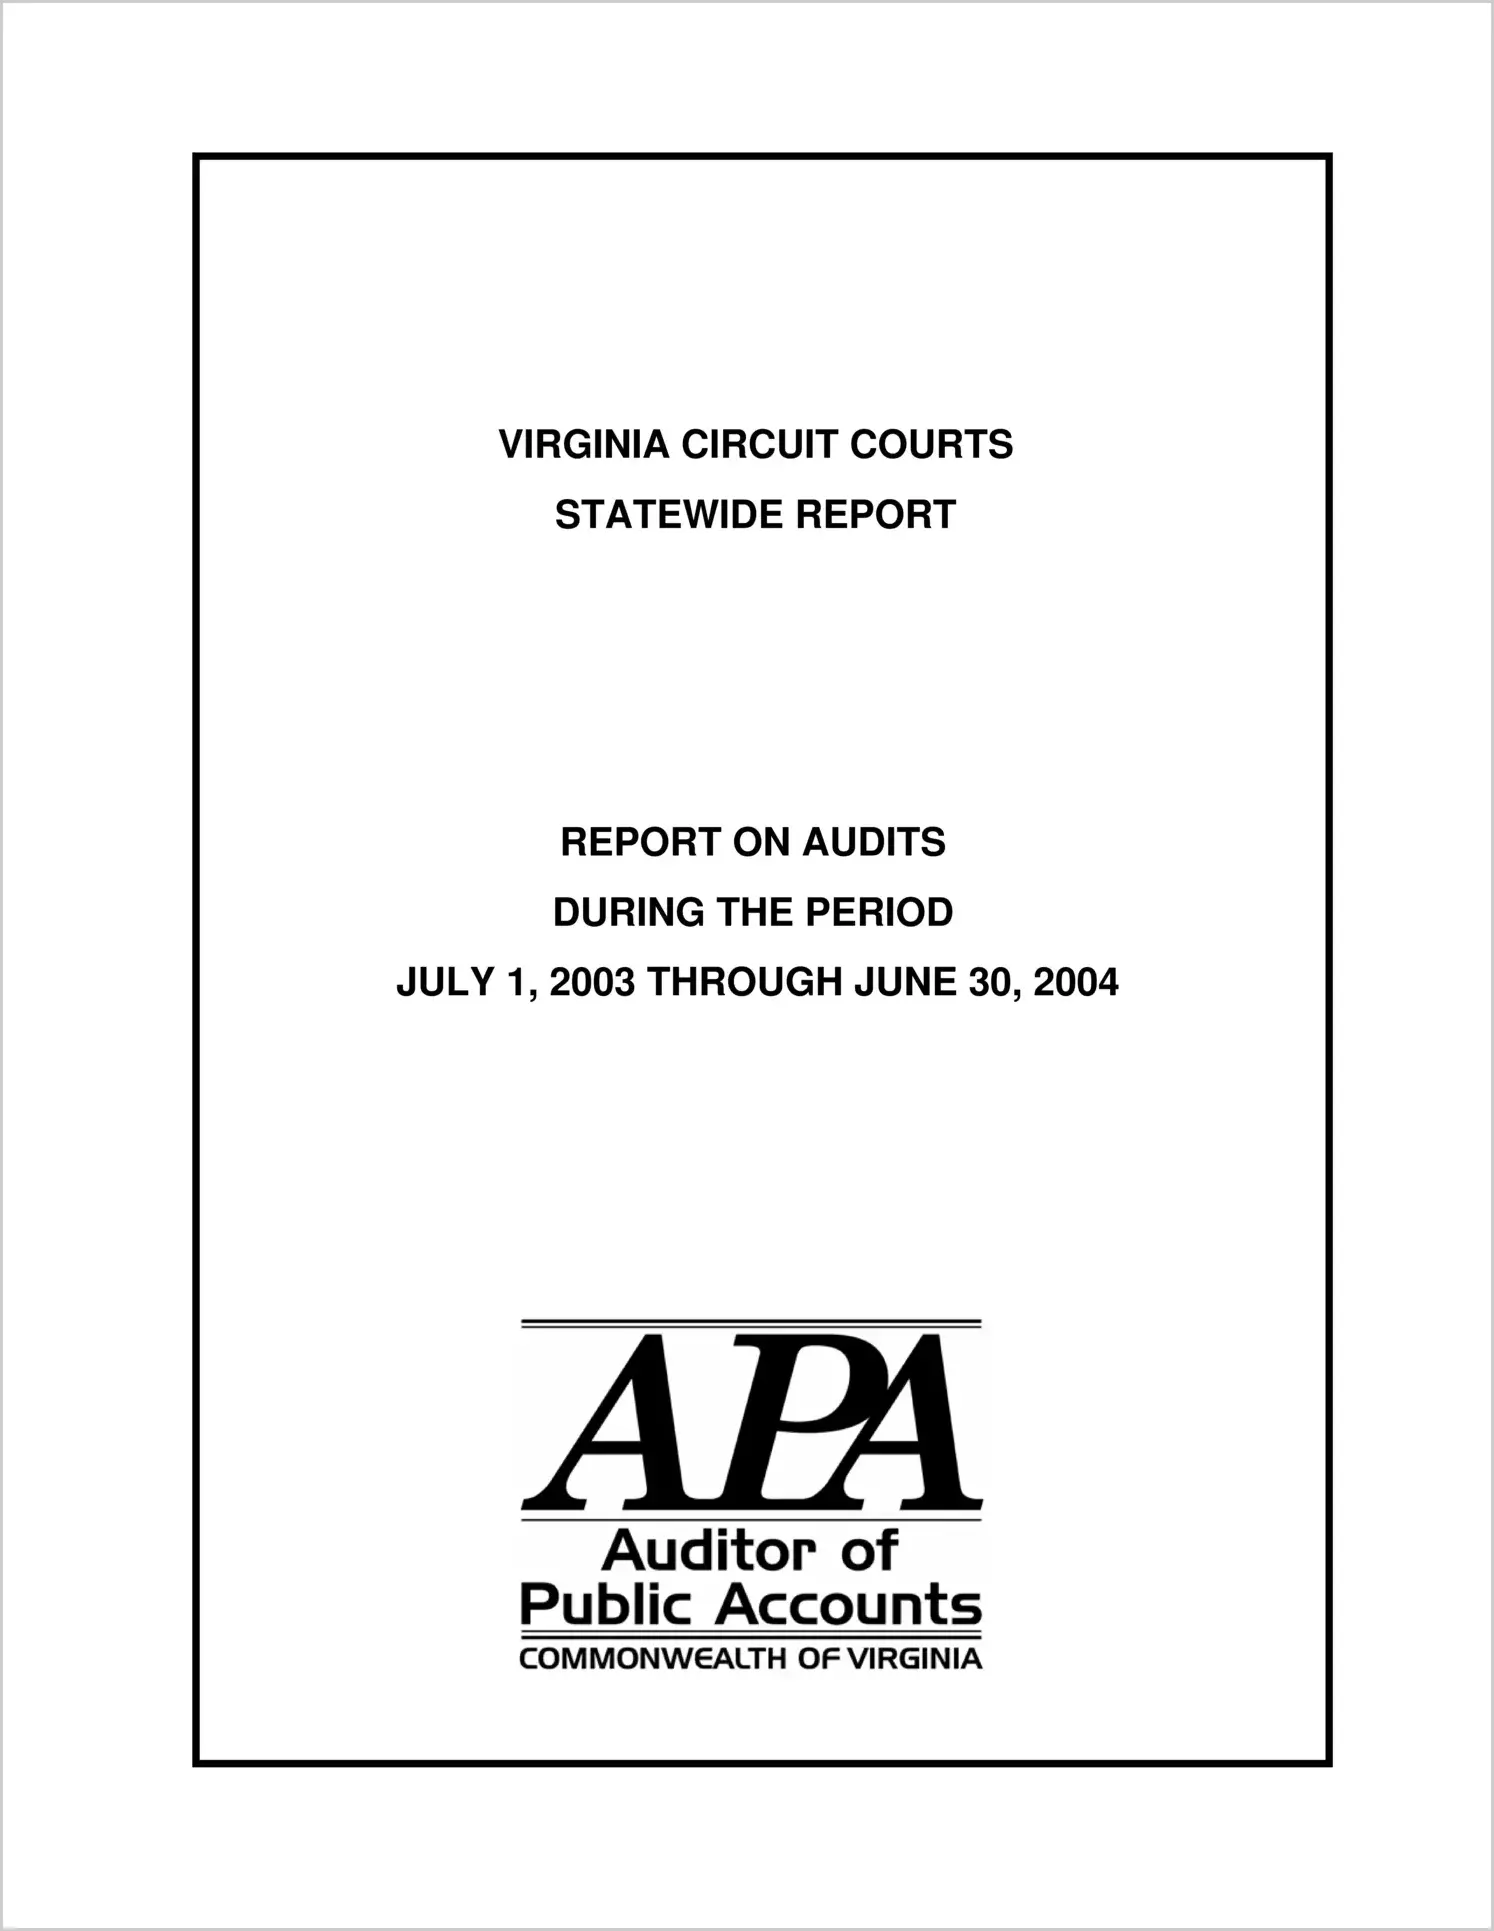 Virginia Circuit Courts Statewide Report during the period July 1, 2003 through June 30, 2004